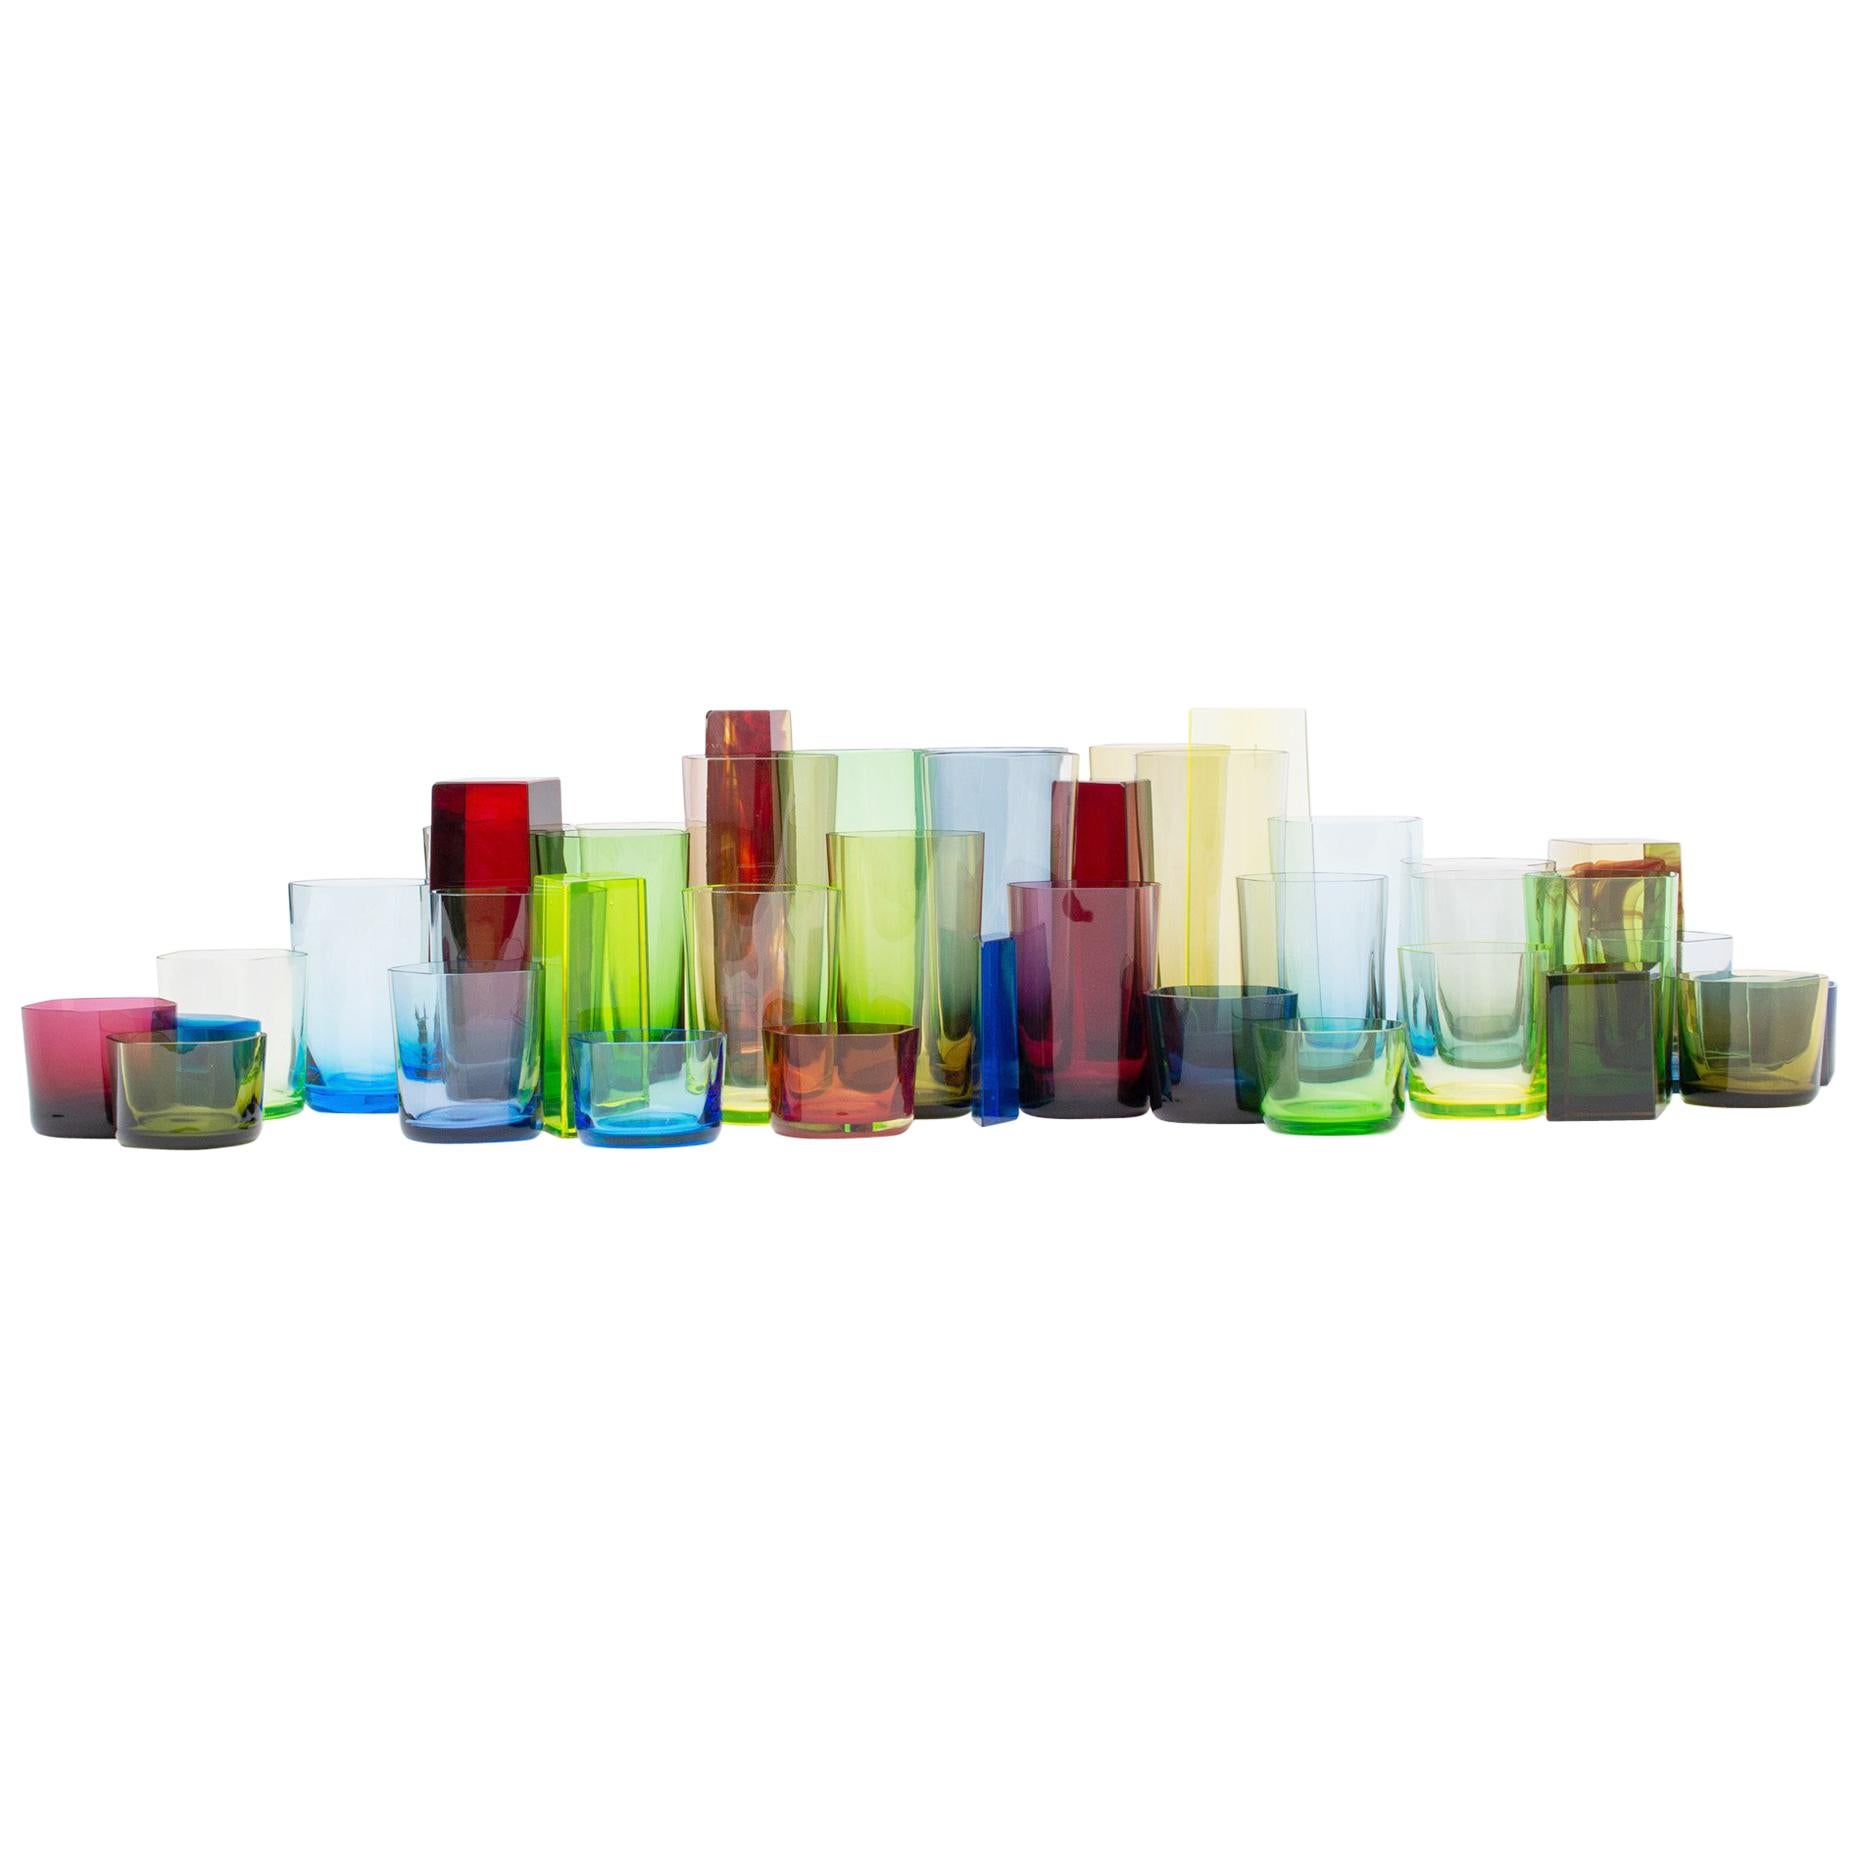 Polygon Glassware by Omer Arbel for OAO Works, Geometric Blown Glass Sculpture  For Sale